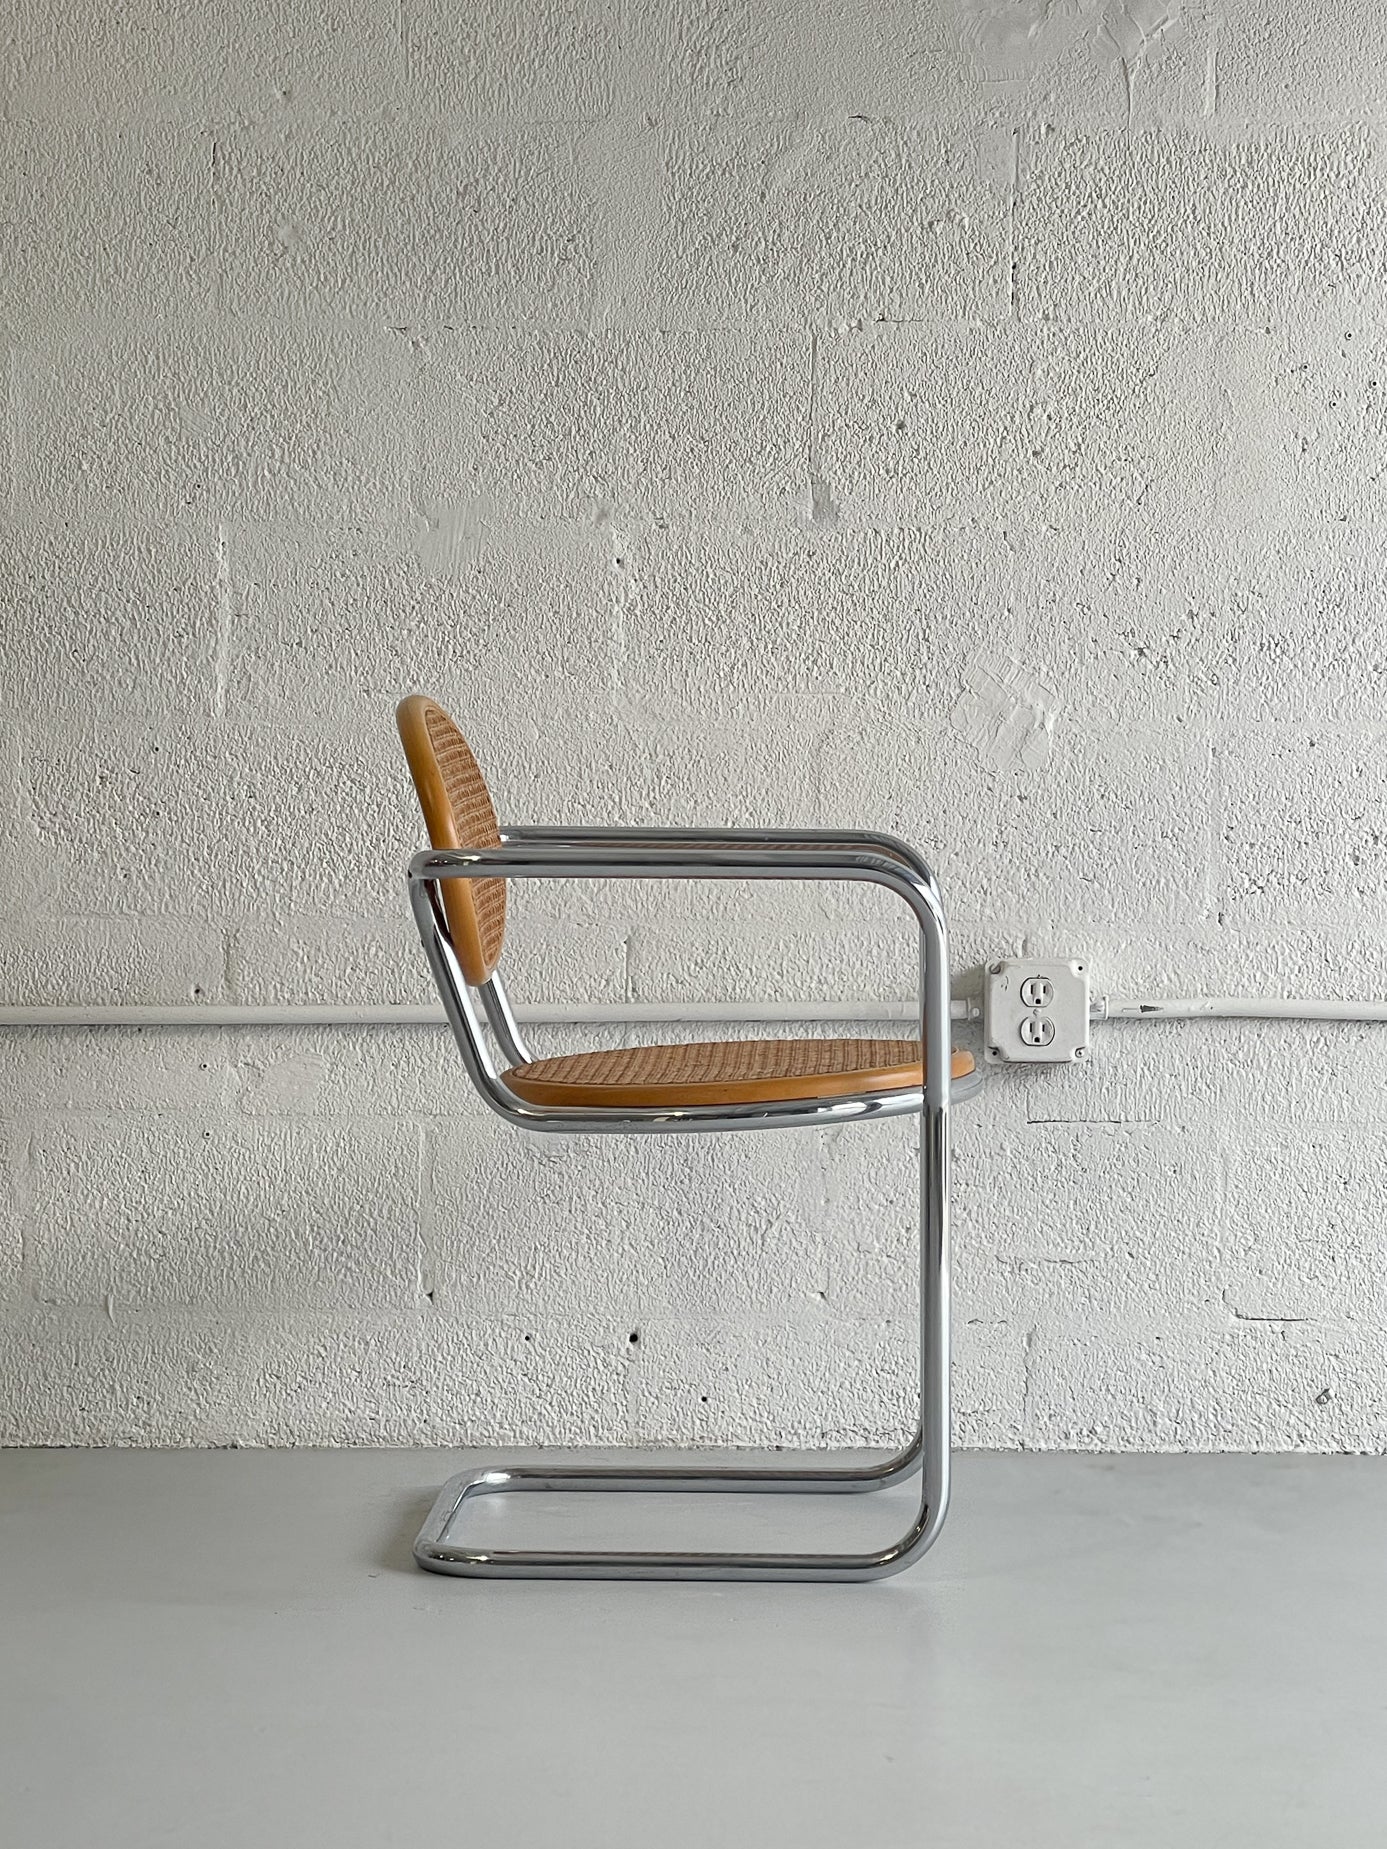 Tubular Chrome and Cane Chair with Floating Seat, 1970s